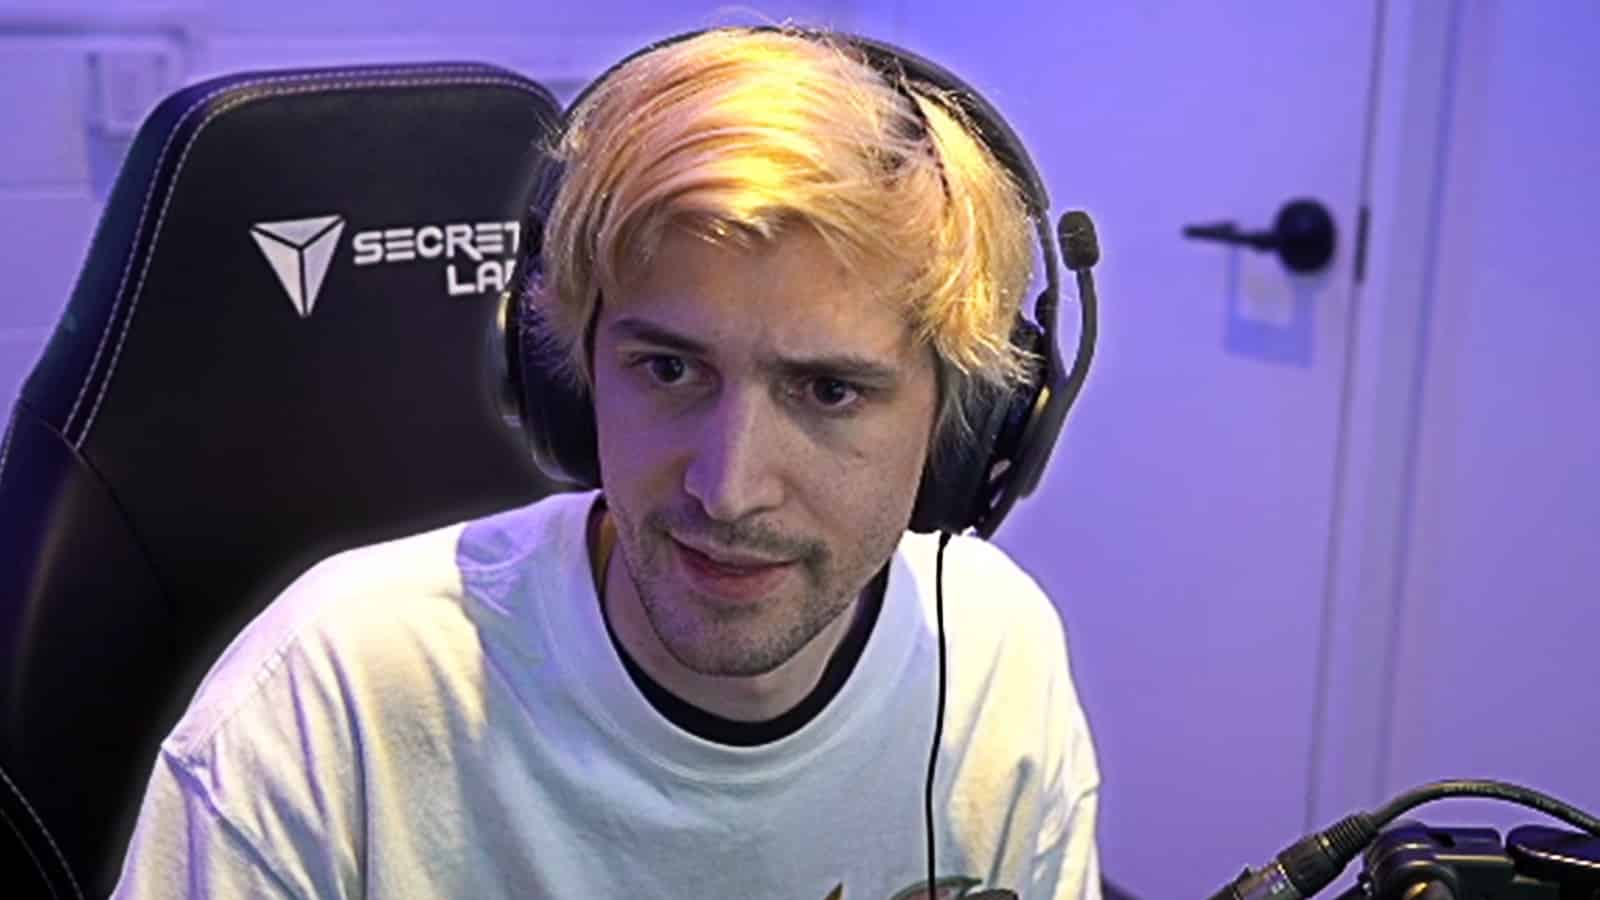 xQc streams on Twitch in purple room.